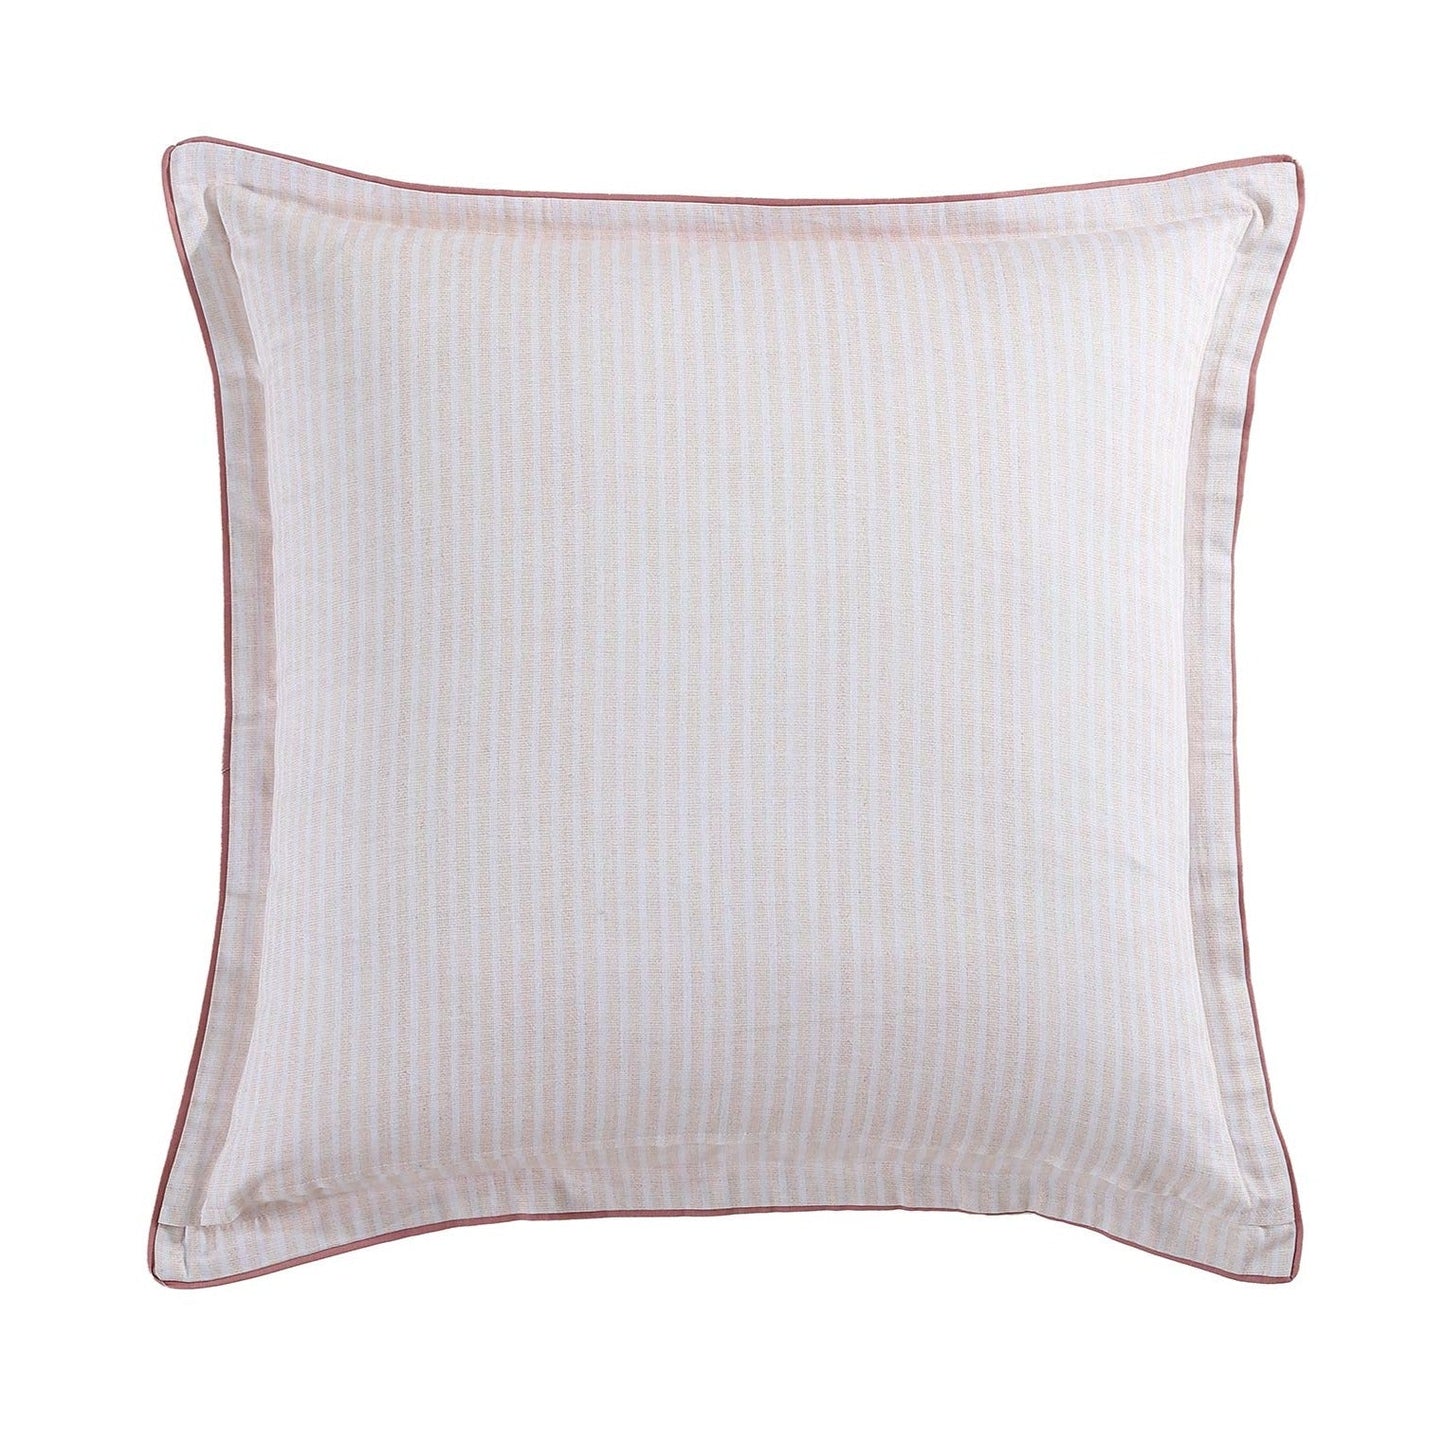 Camille Blush European Pillowcase by Private Collection